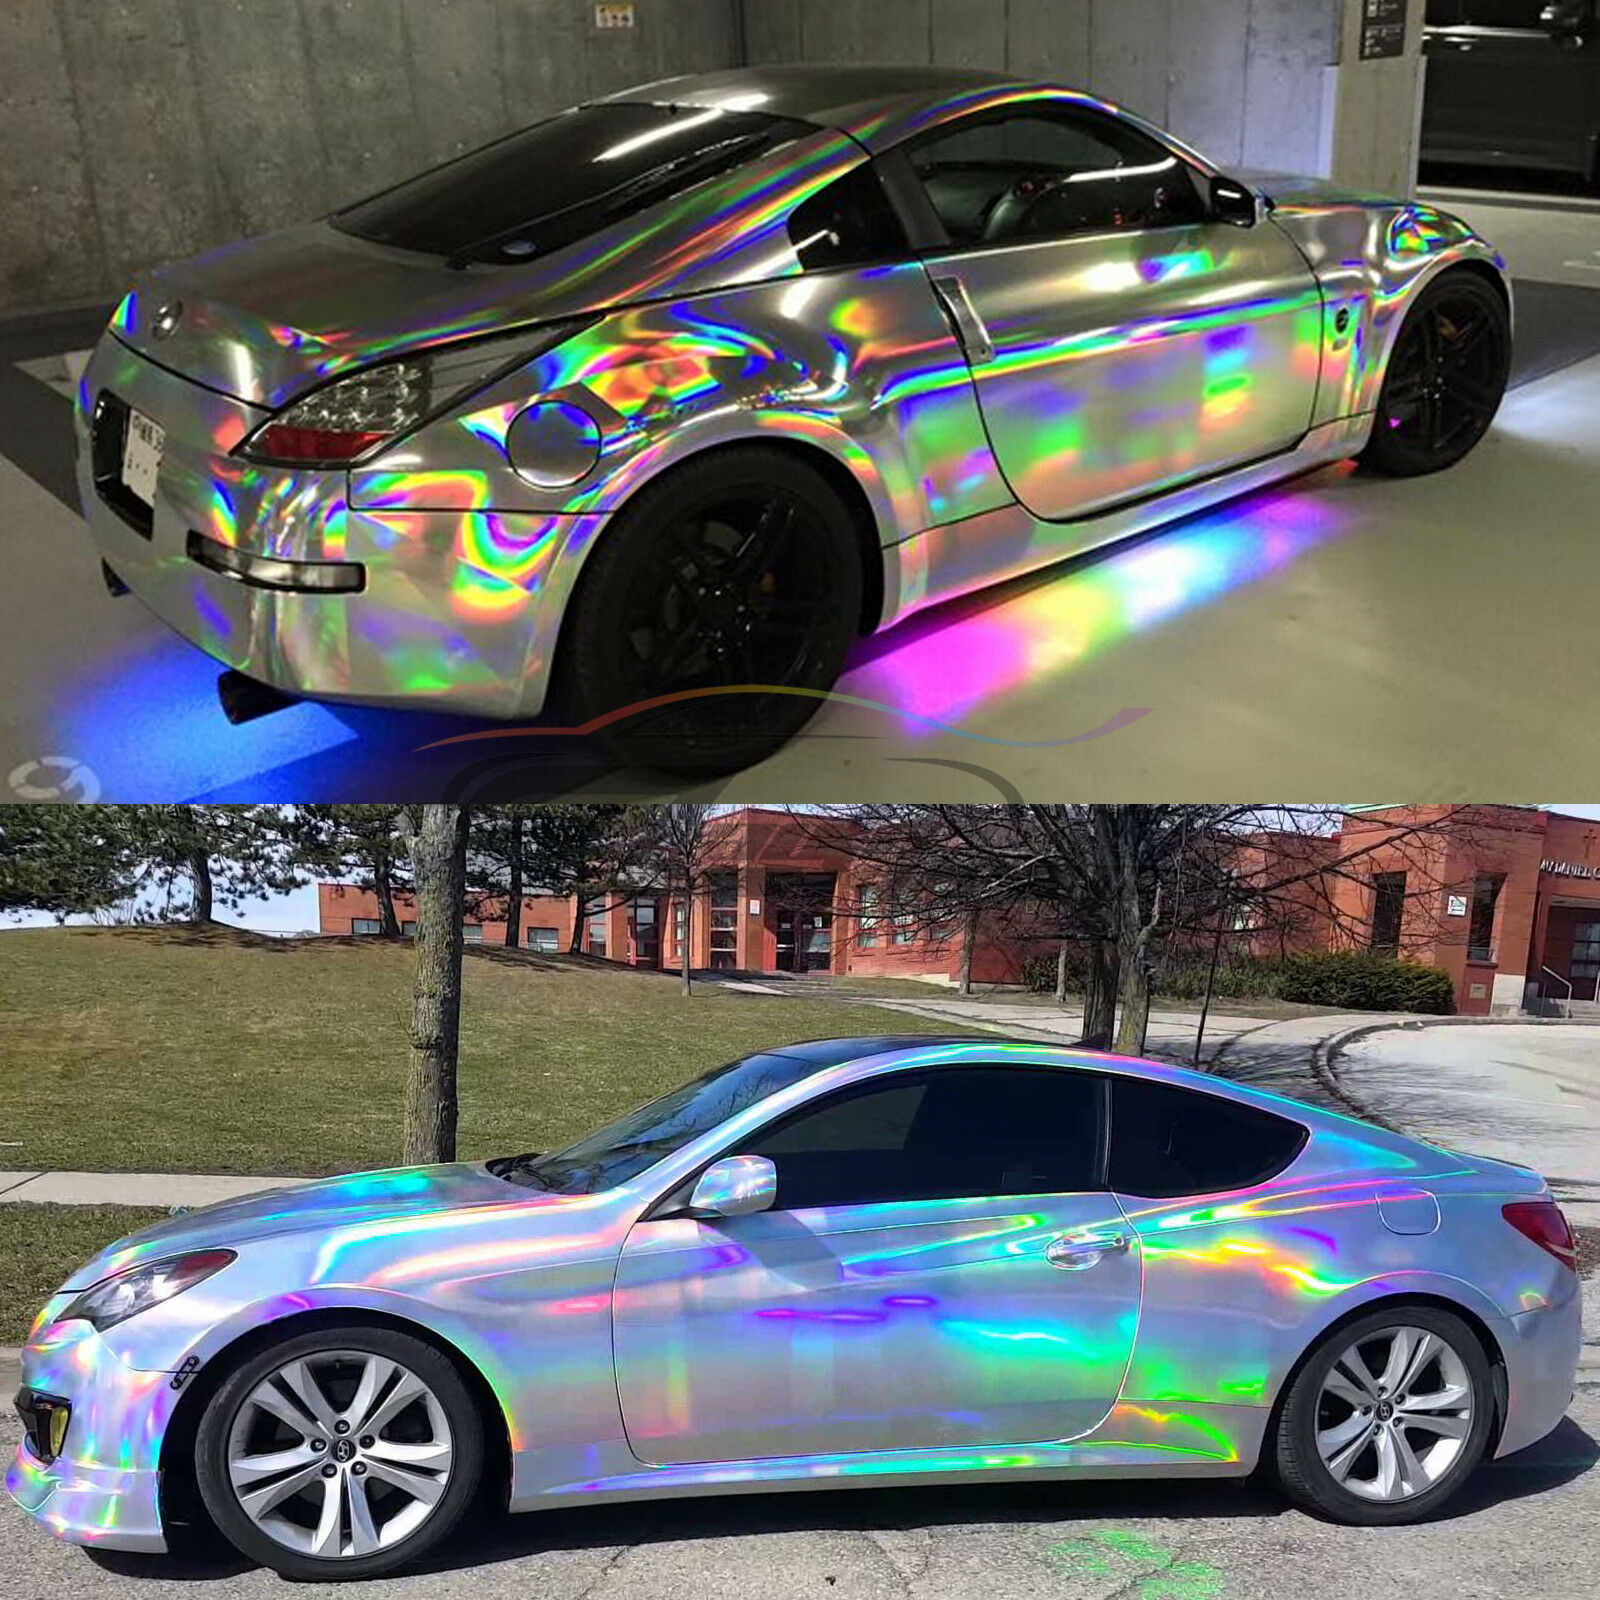 Car Wrapping Is the Flexible Way to Decorate Your Car - eBay Motors Blog